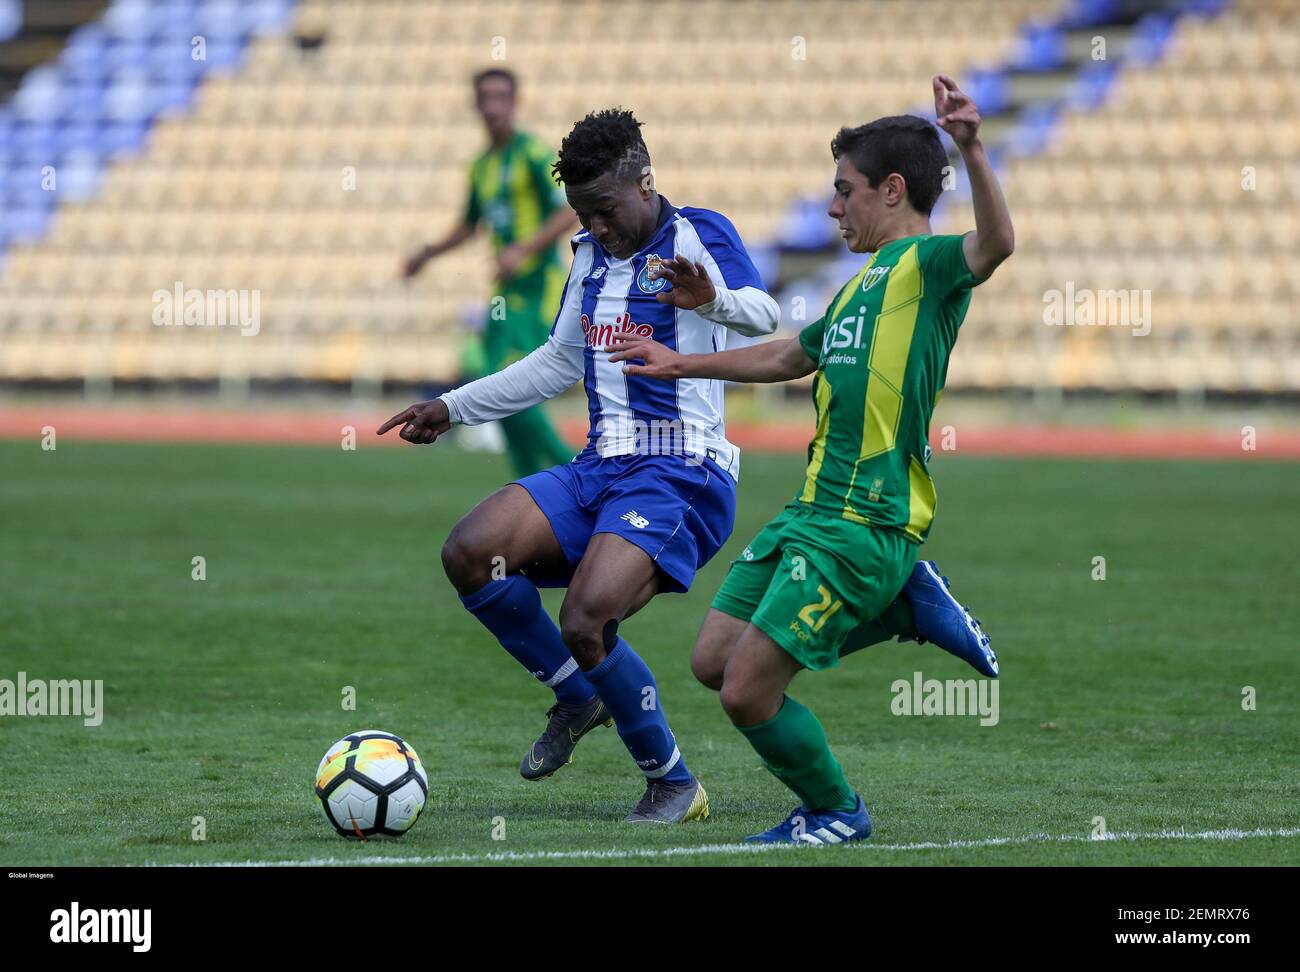 Vila Nova de Gaia, 04/04/2019 - Fc Porto received this morning the Tondela,  in the EstÃ¡dio Jorge Sampaio, in game of the 3rd day of the III Phase of  the National Championship